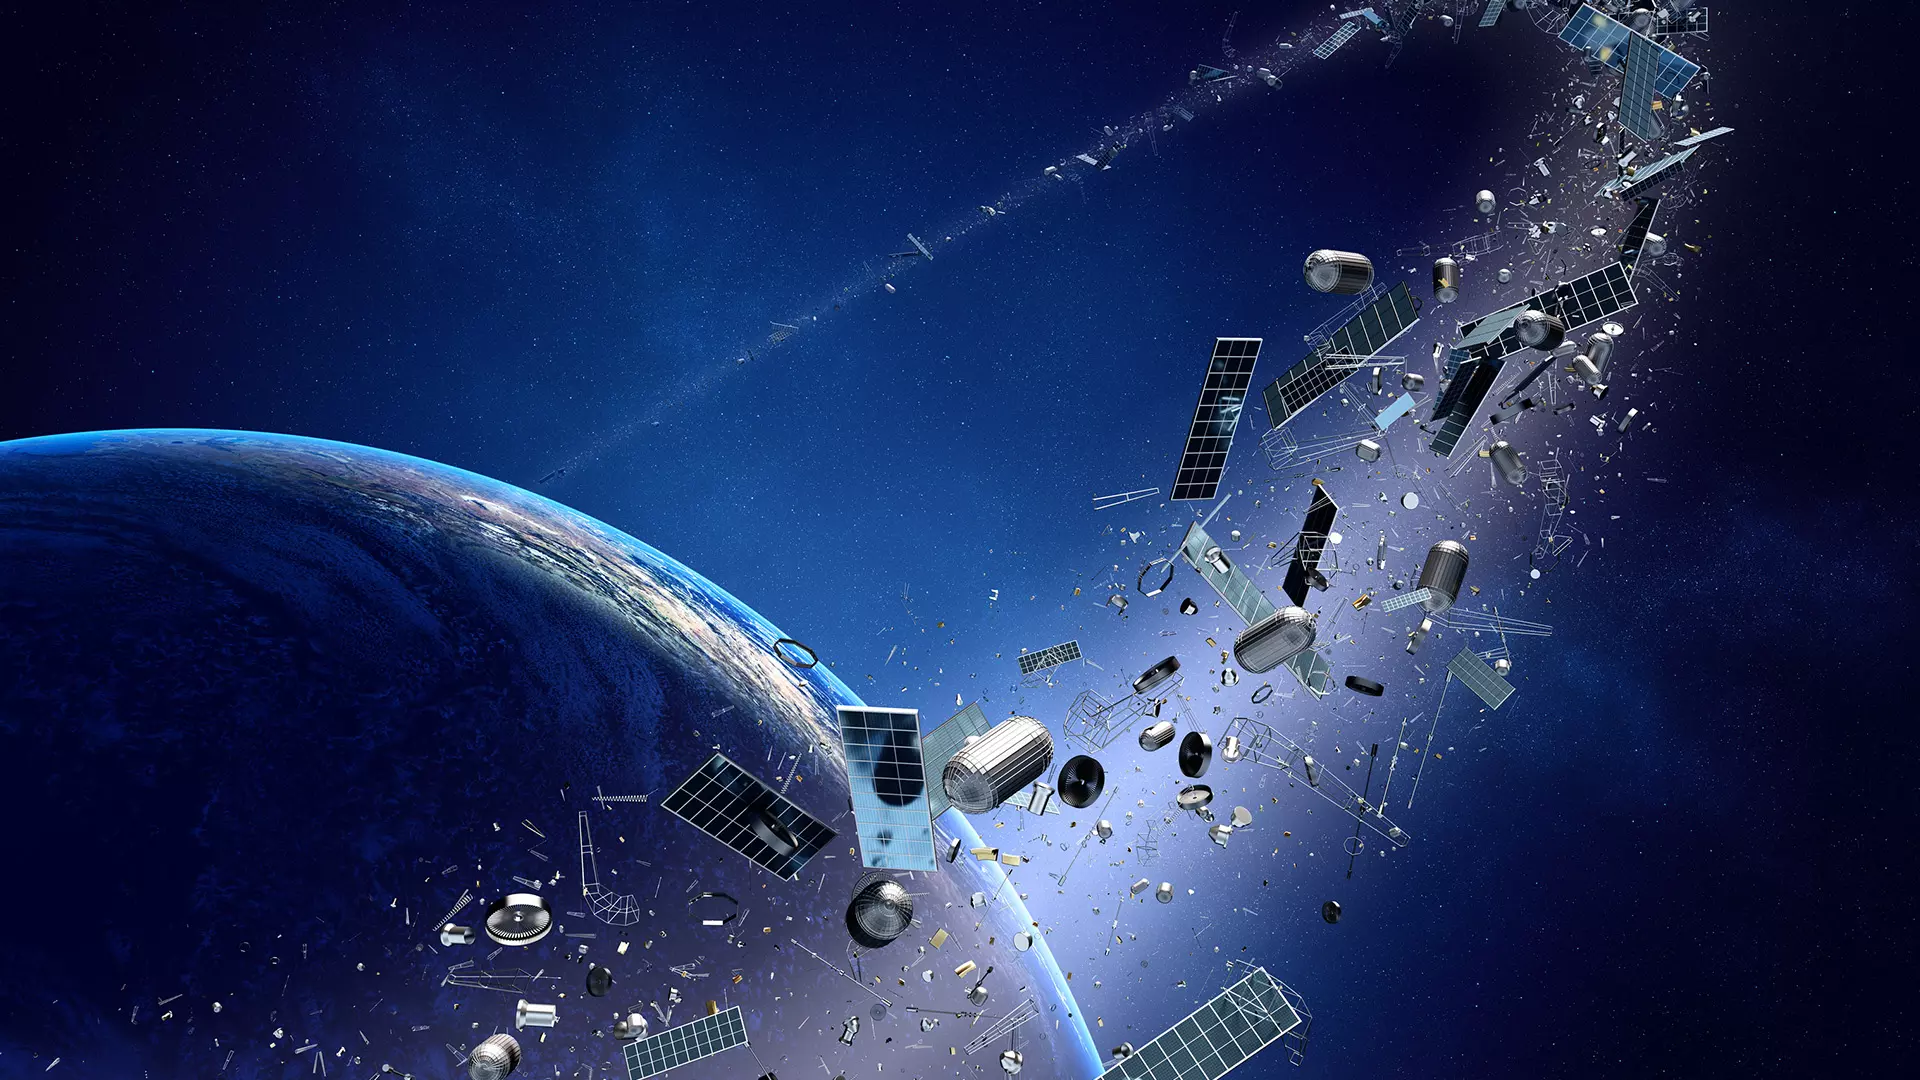 Tool bag joins space litter: Why space community is losing sleep over junk orbiting Earth?